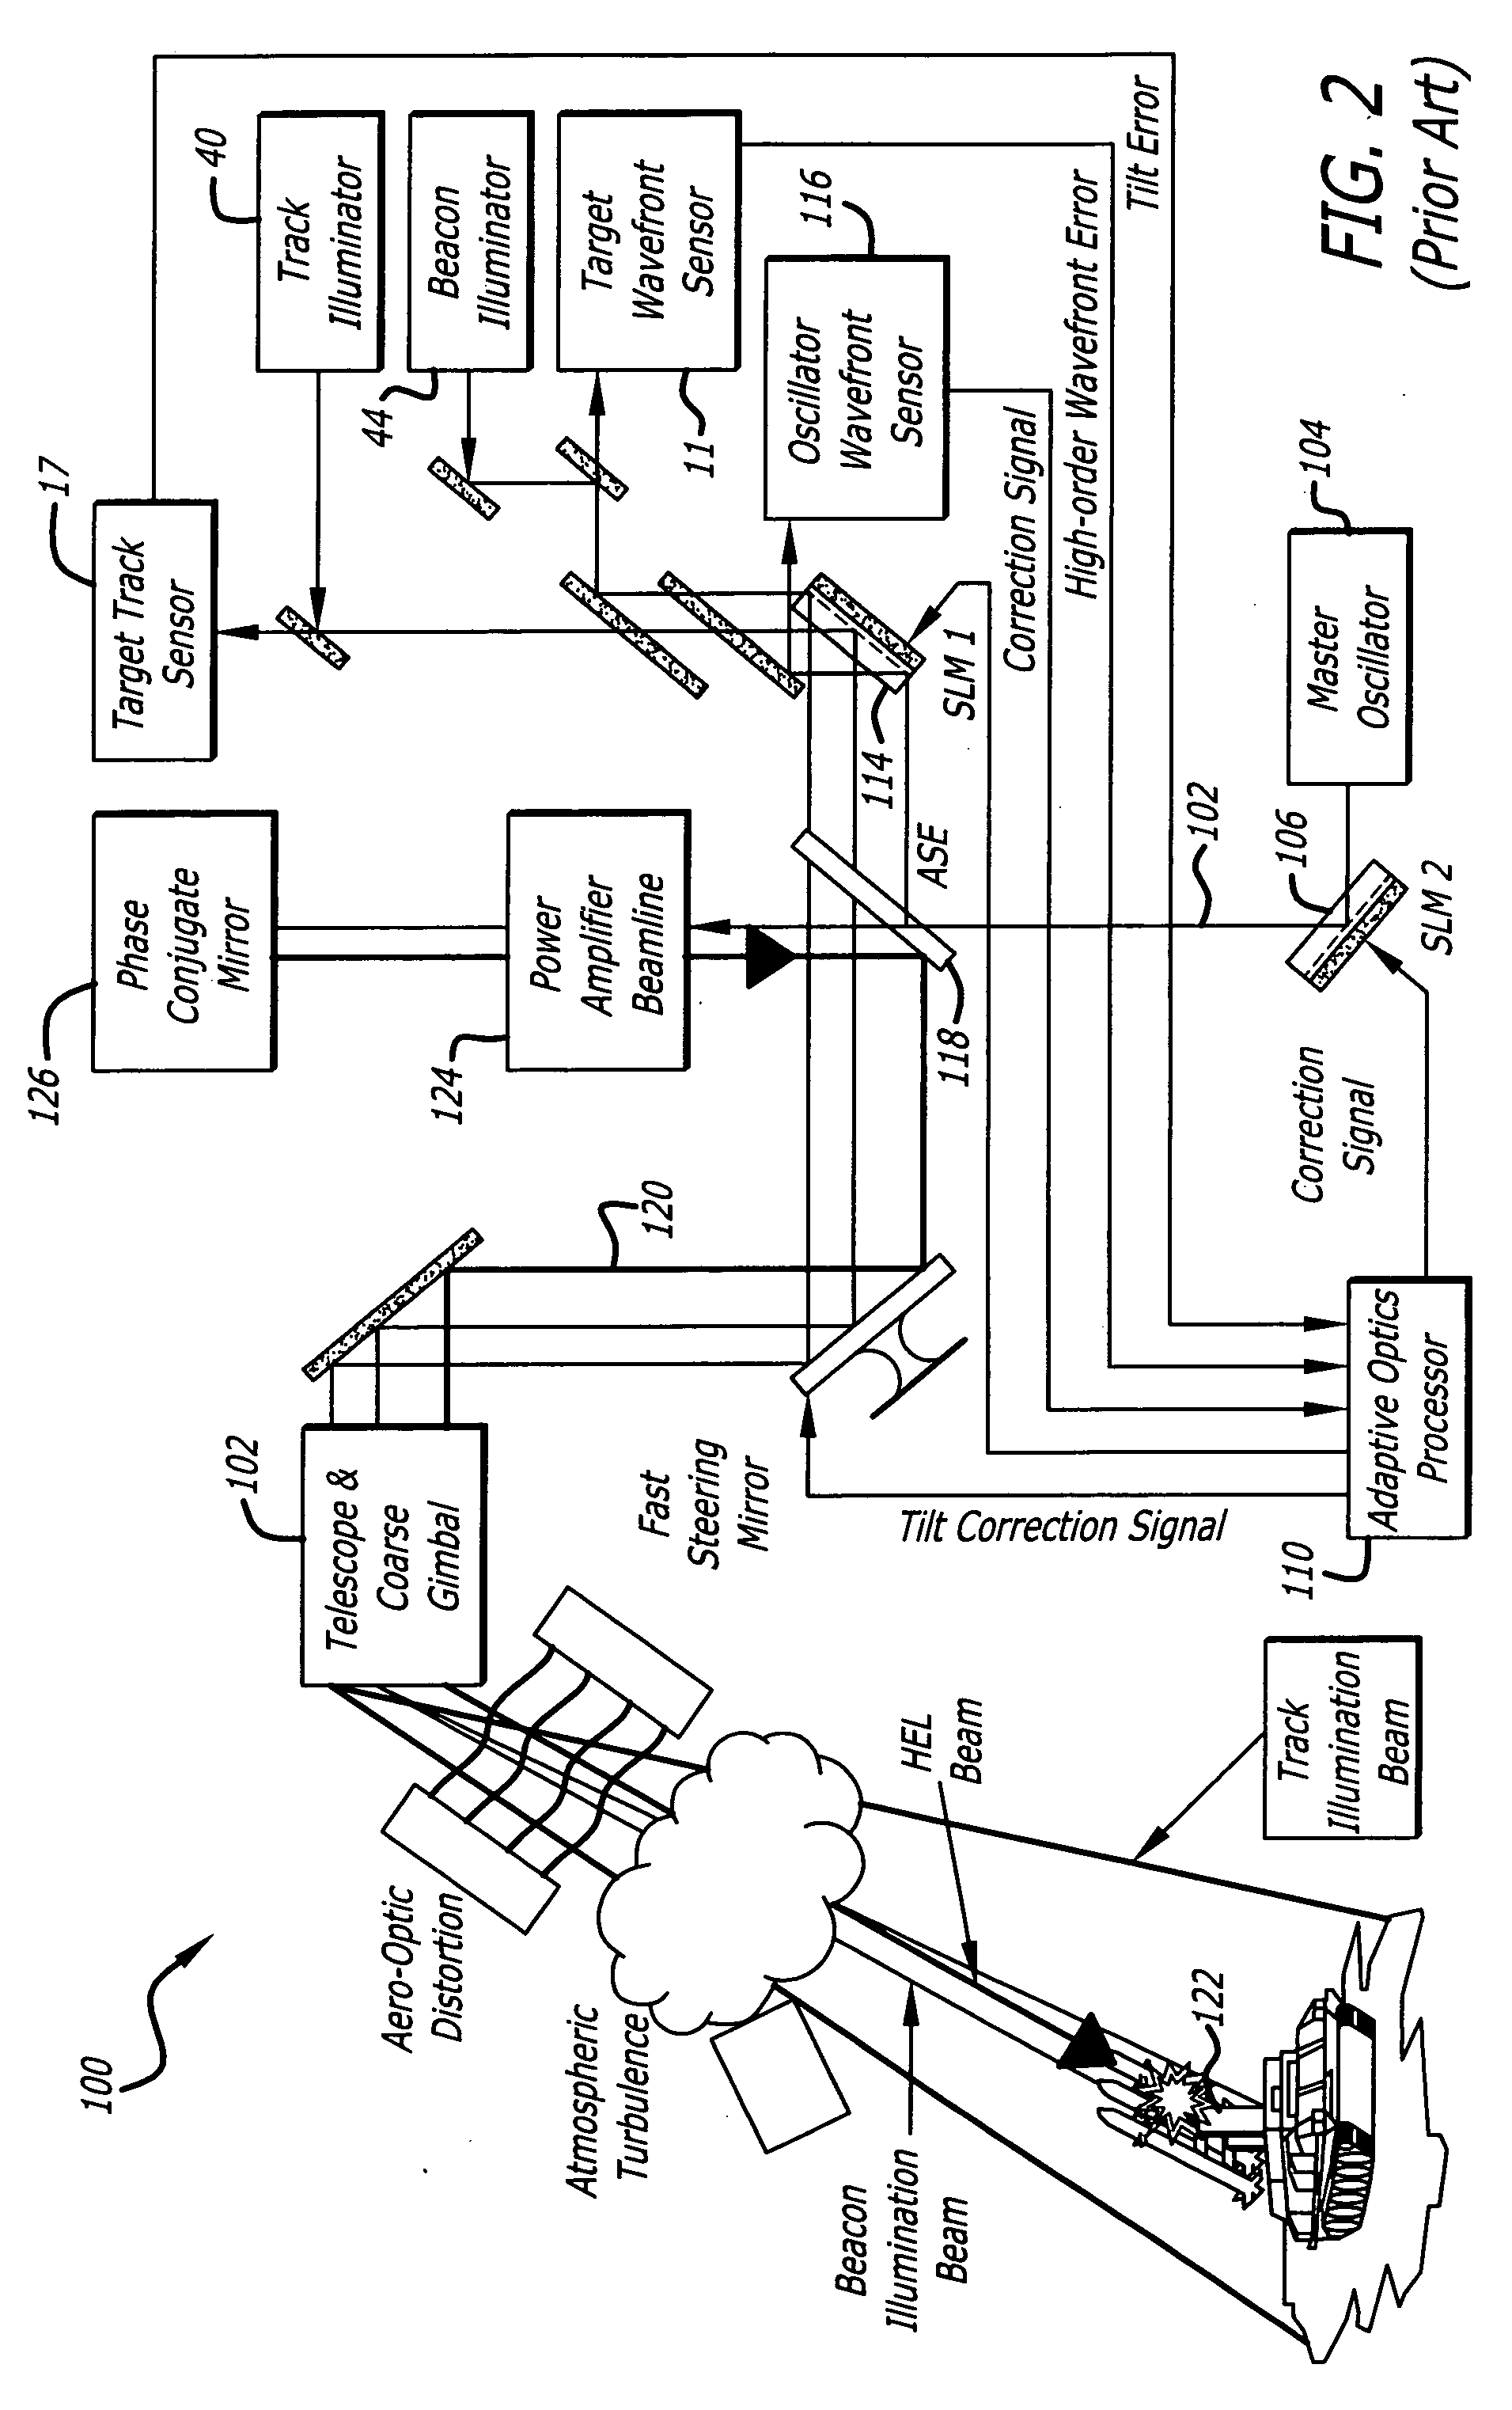 Beam control system with extended beacon and method